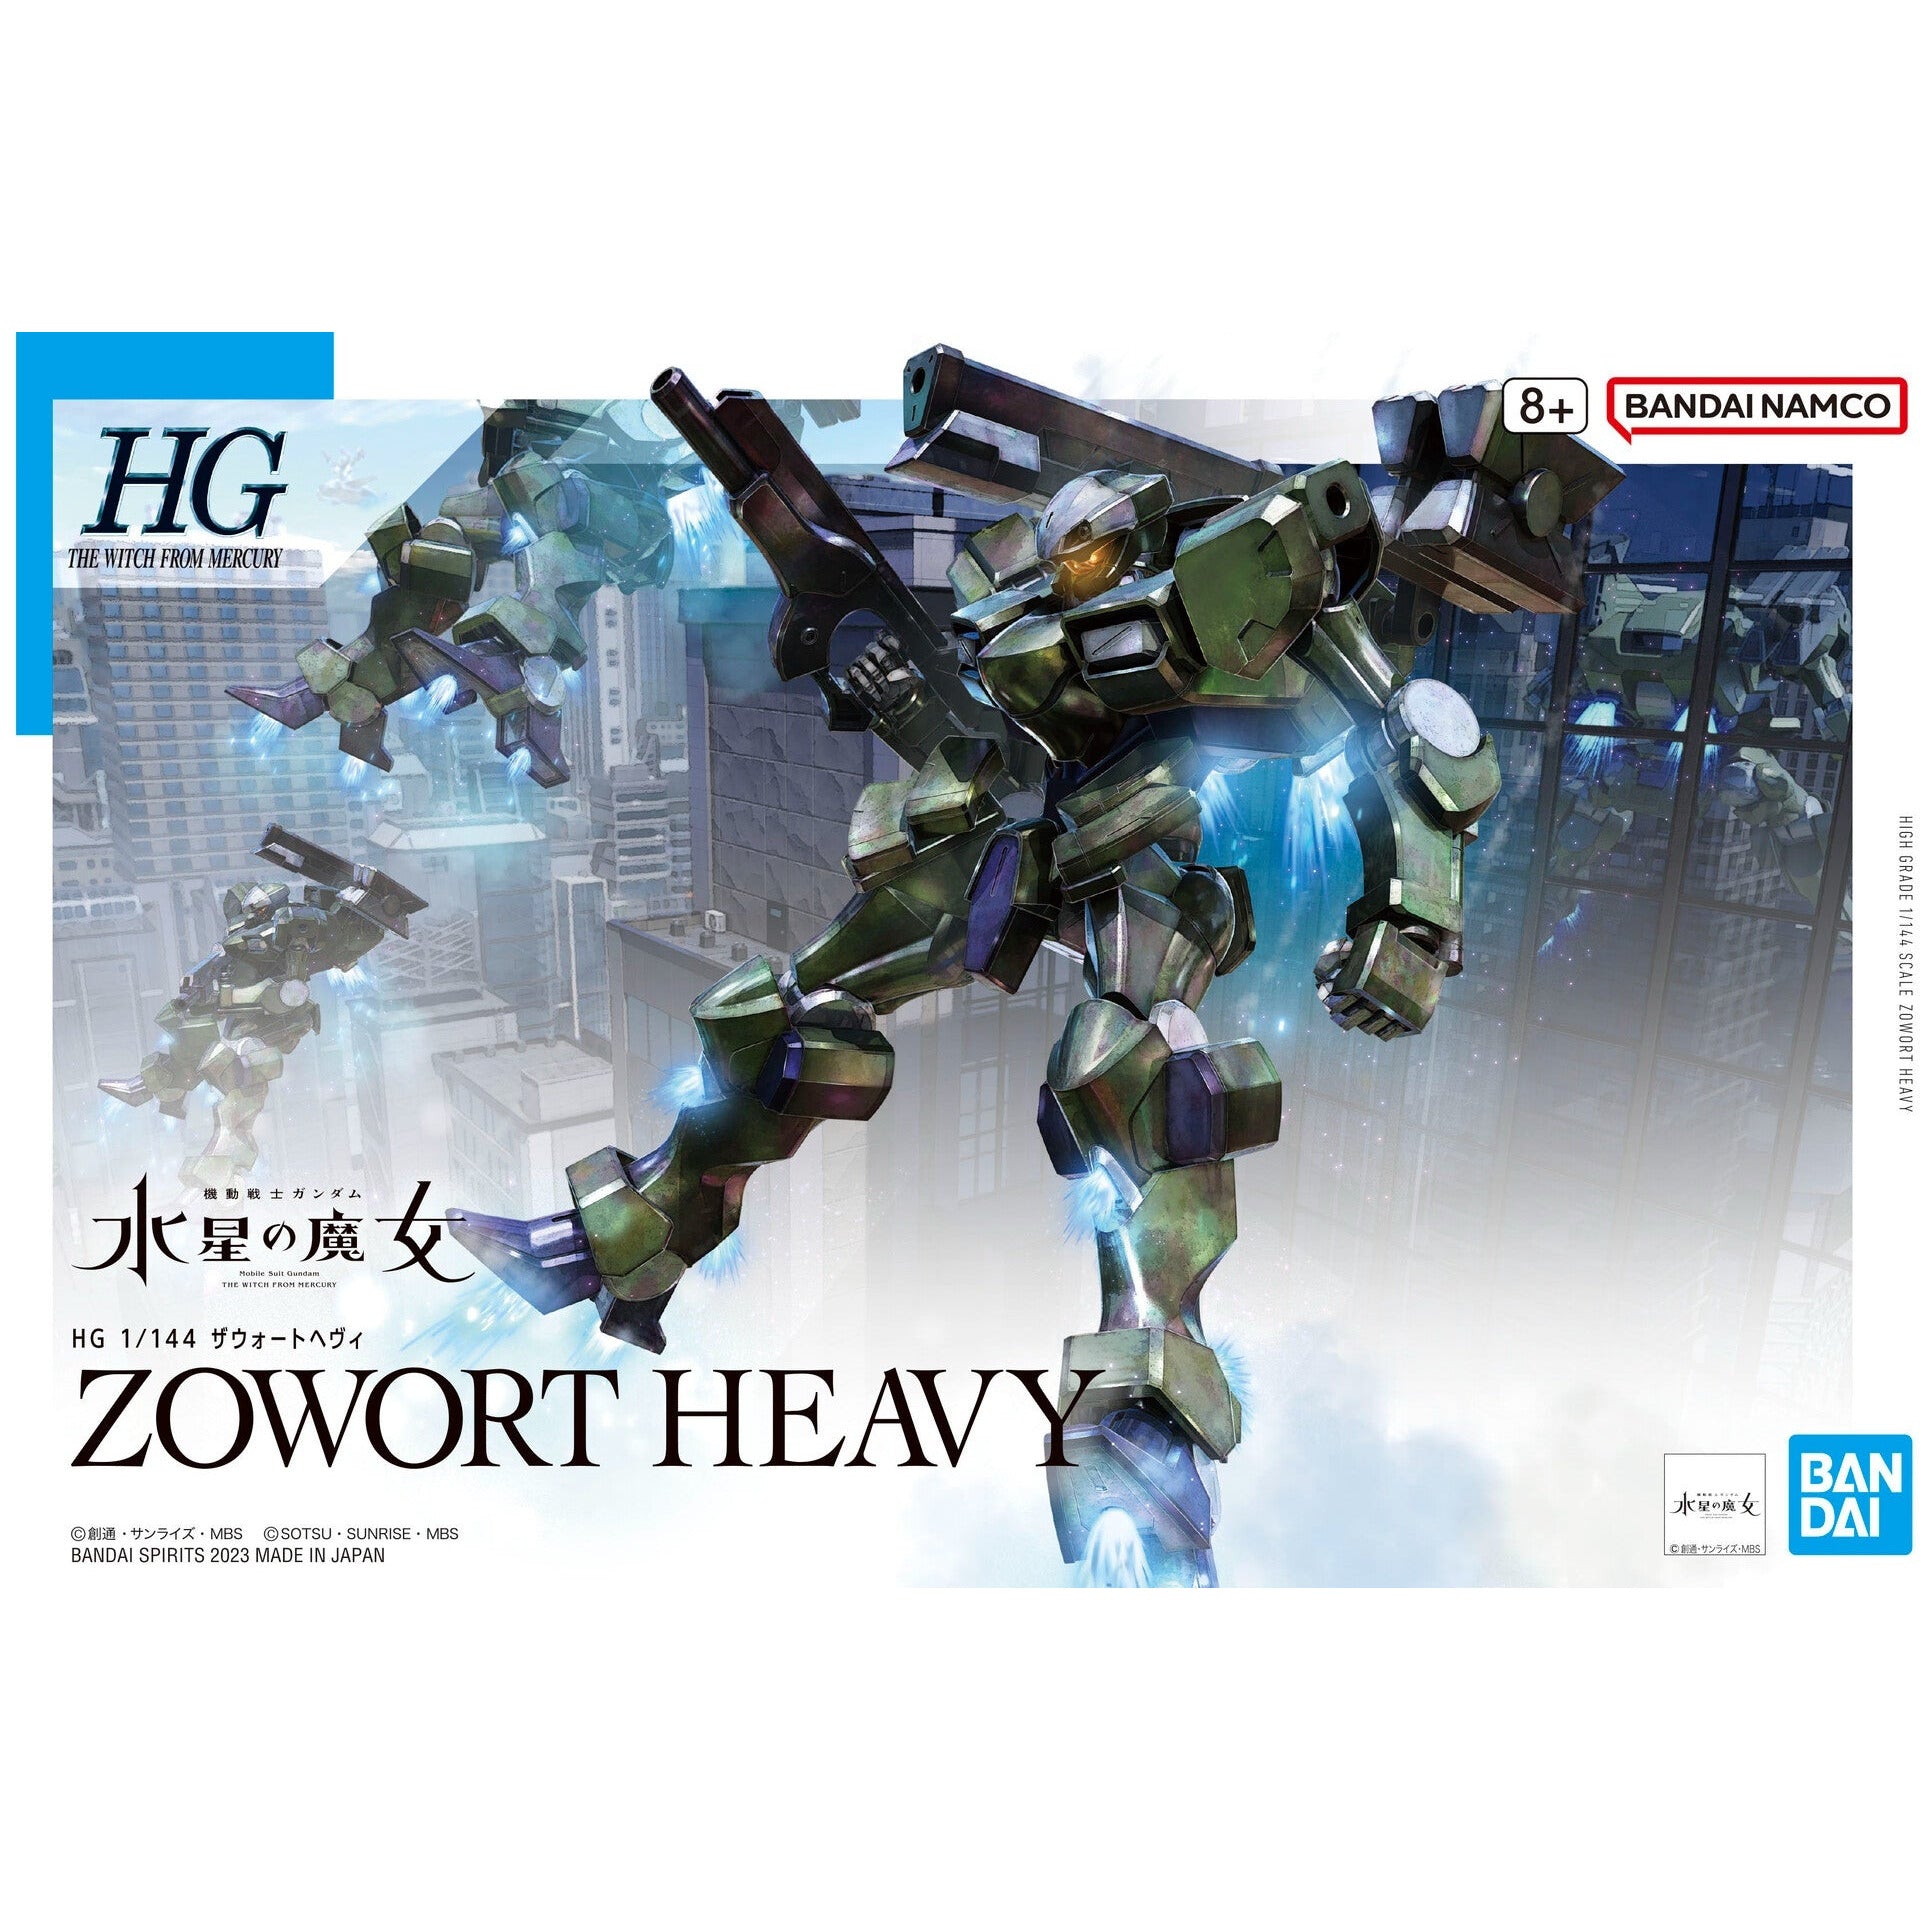 HG 1/144 The Witch from Mercury #20 F/D-20 Zowort Heavy #5065111 by Bandai